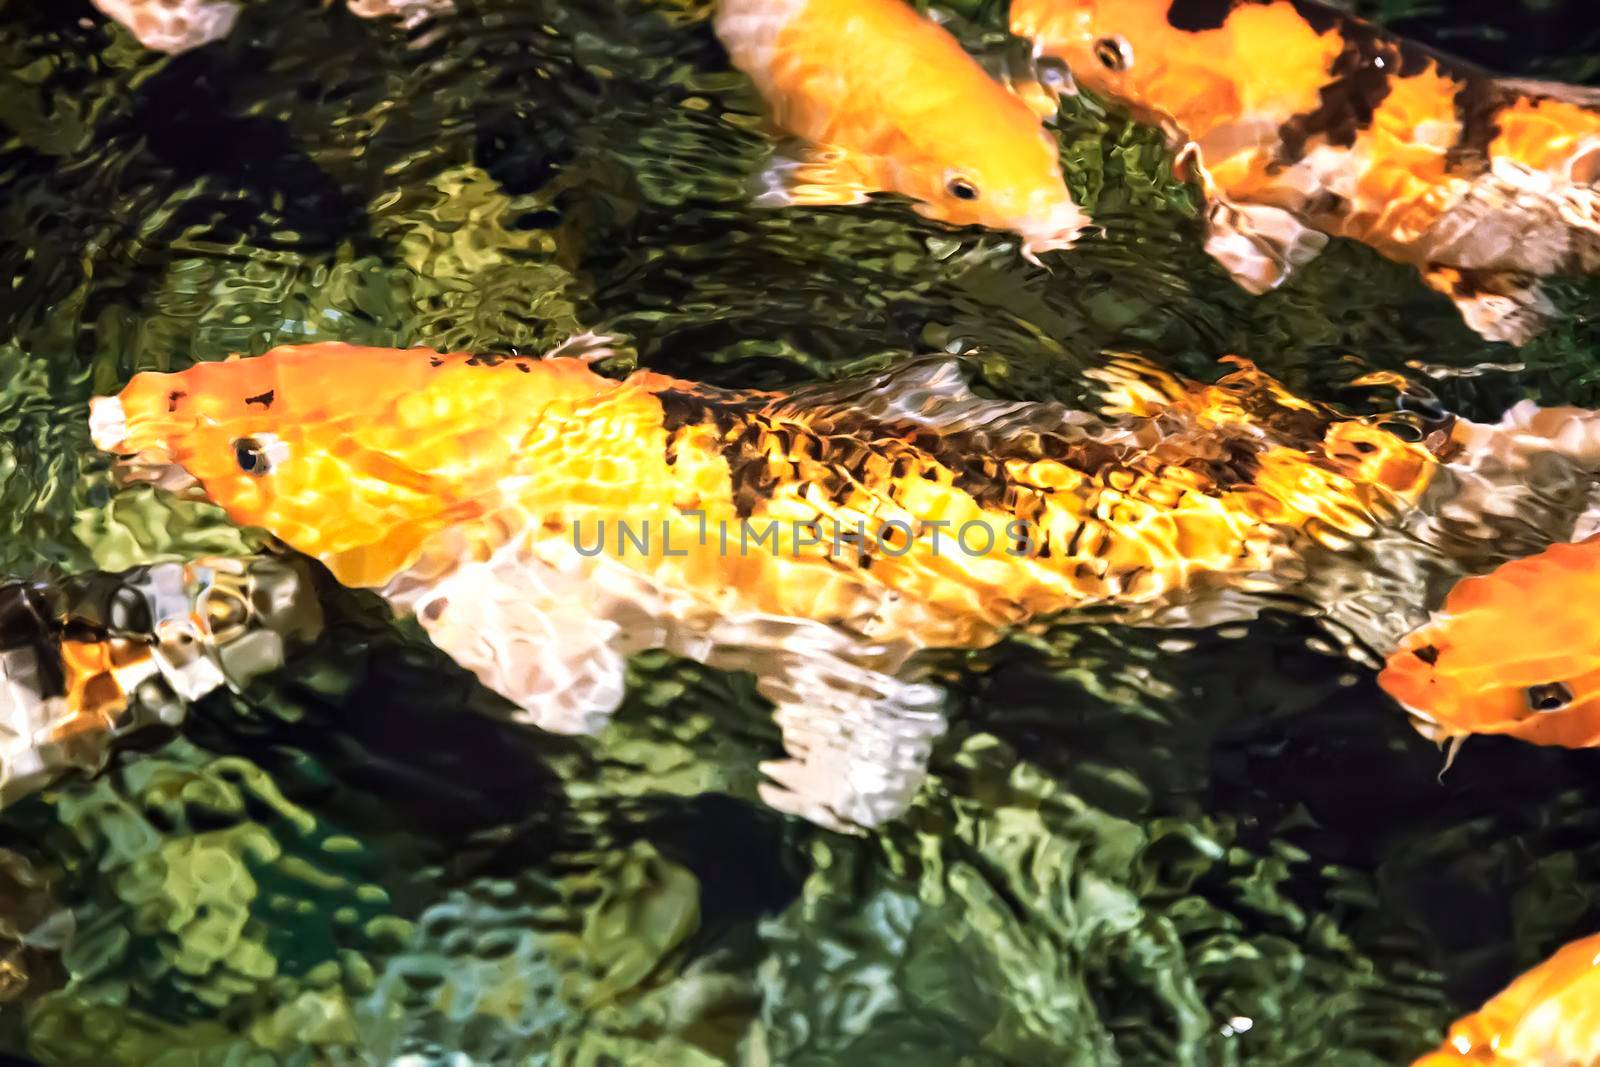 In the aquarium swims a large number koi - an ornamental domesticated fish, native to Japan.